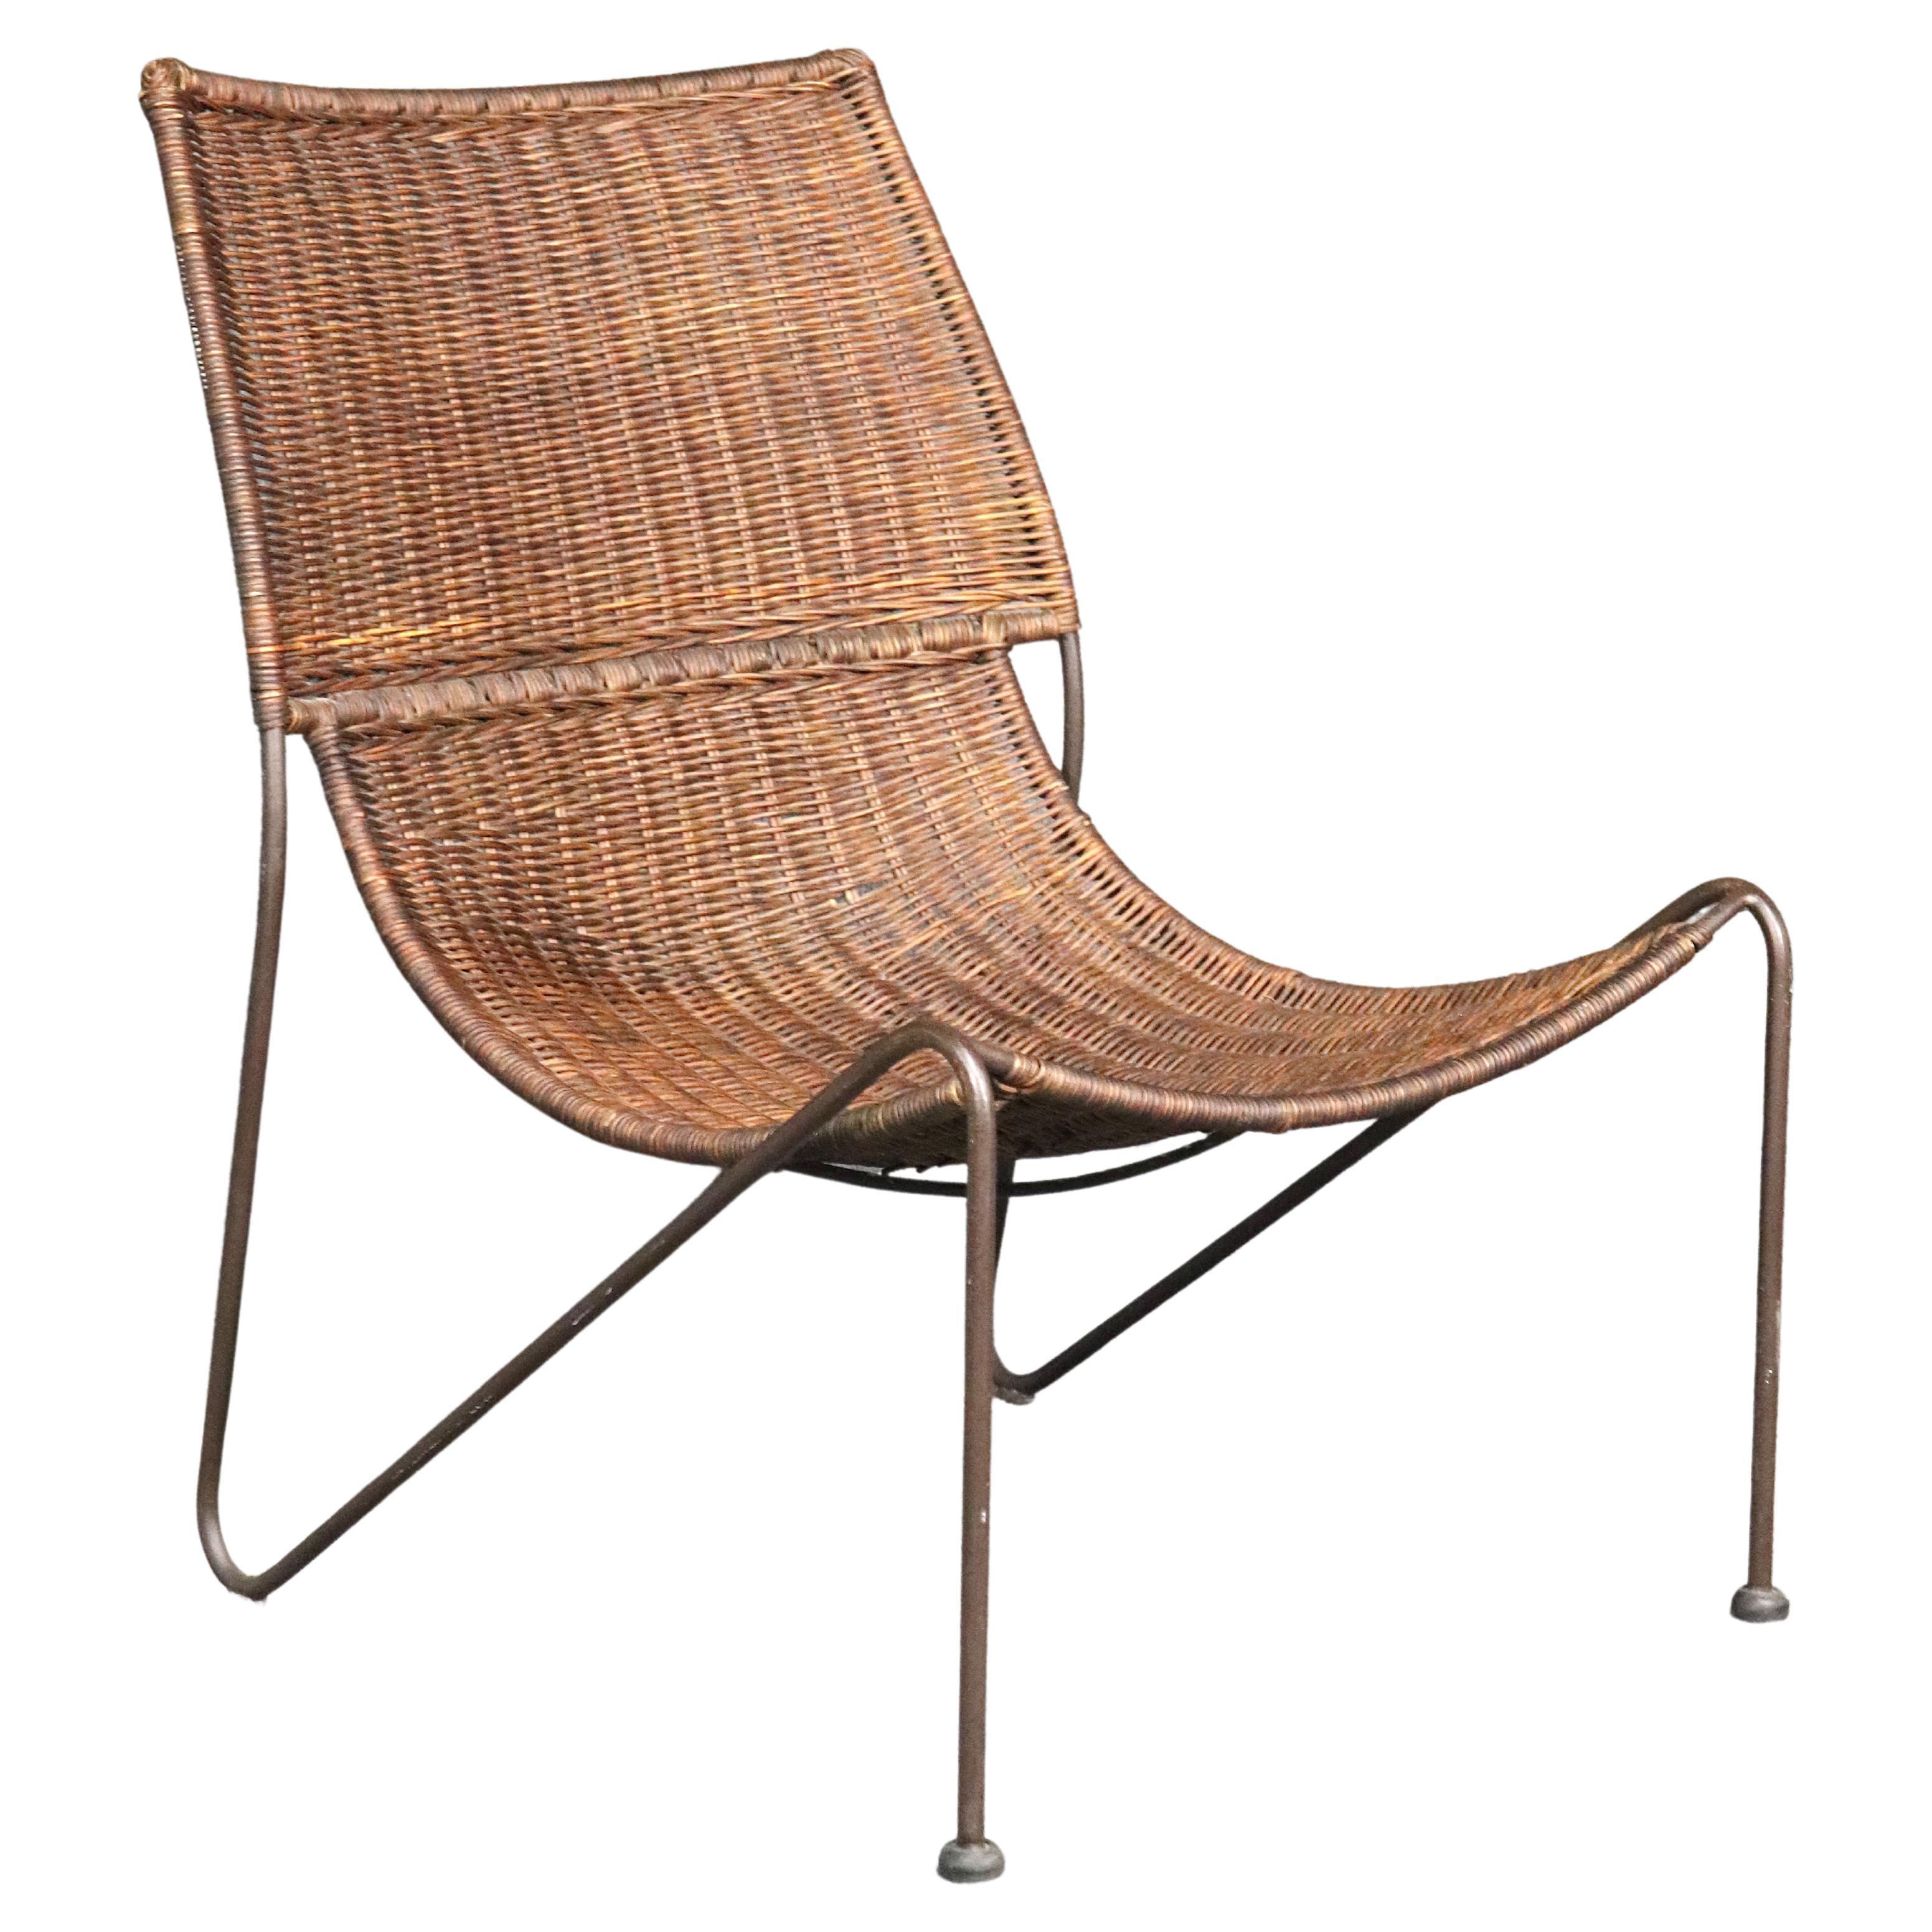 Frederick Weinberg Chair - 2 For Sale on 1stDibs